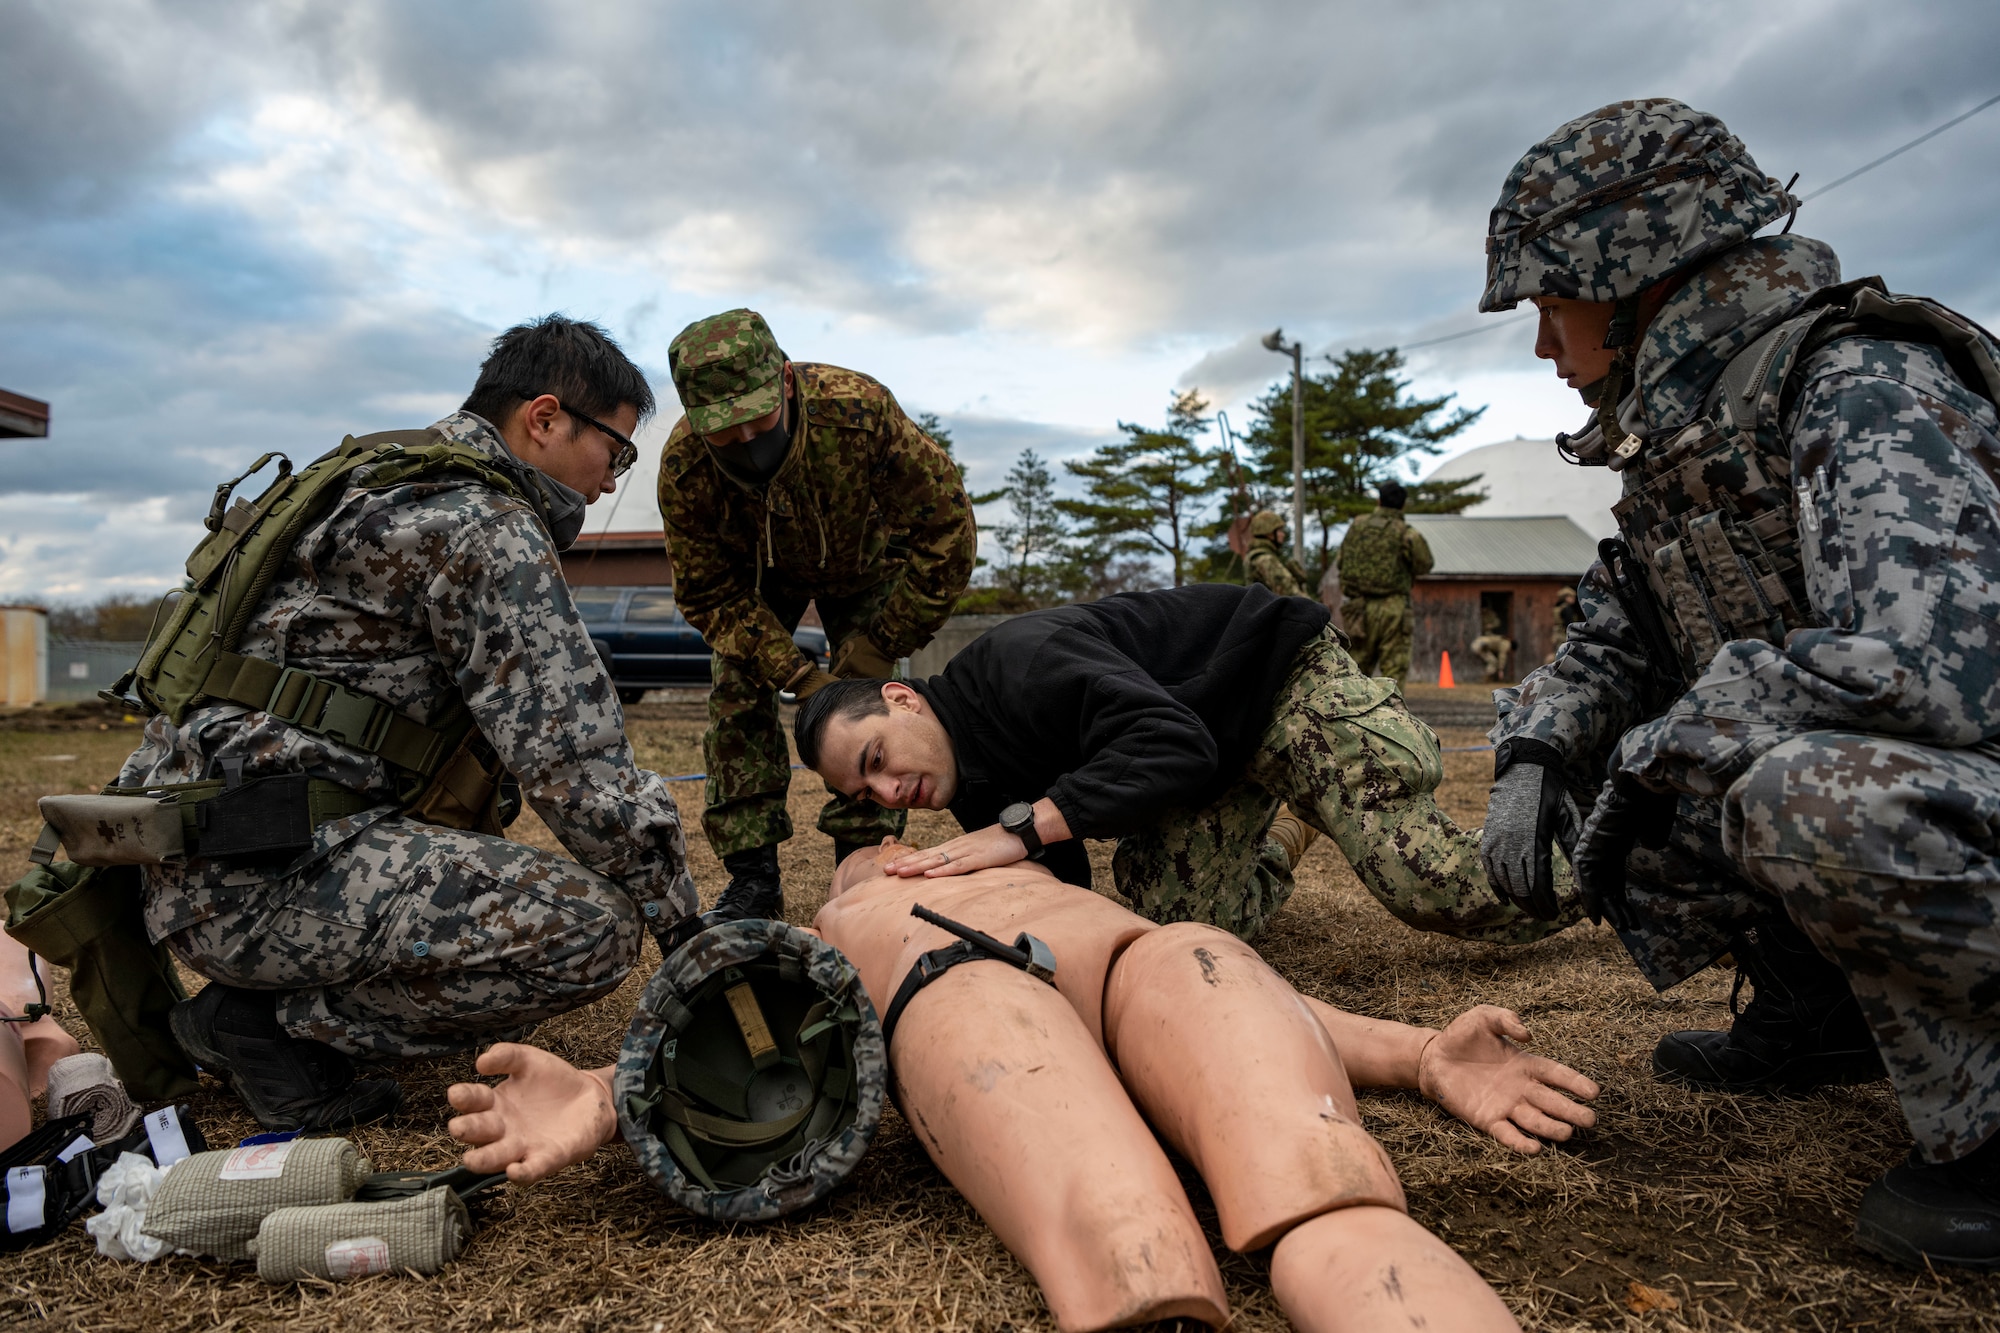 Service members conduct medical care to a training dummy.